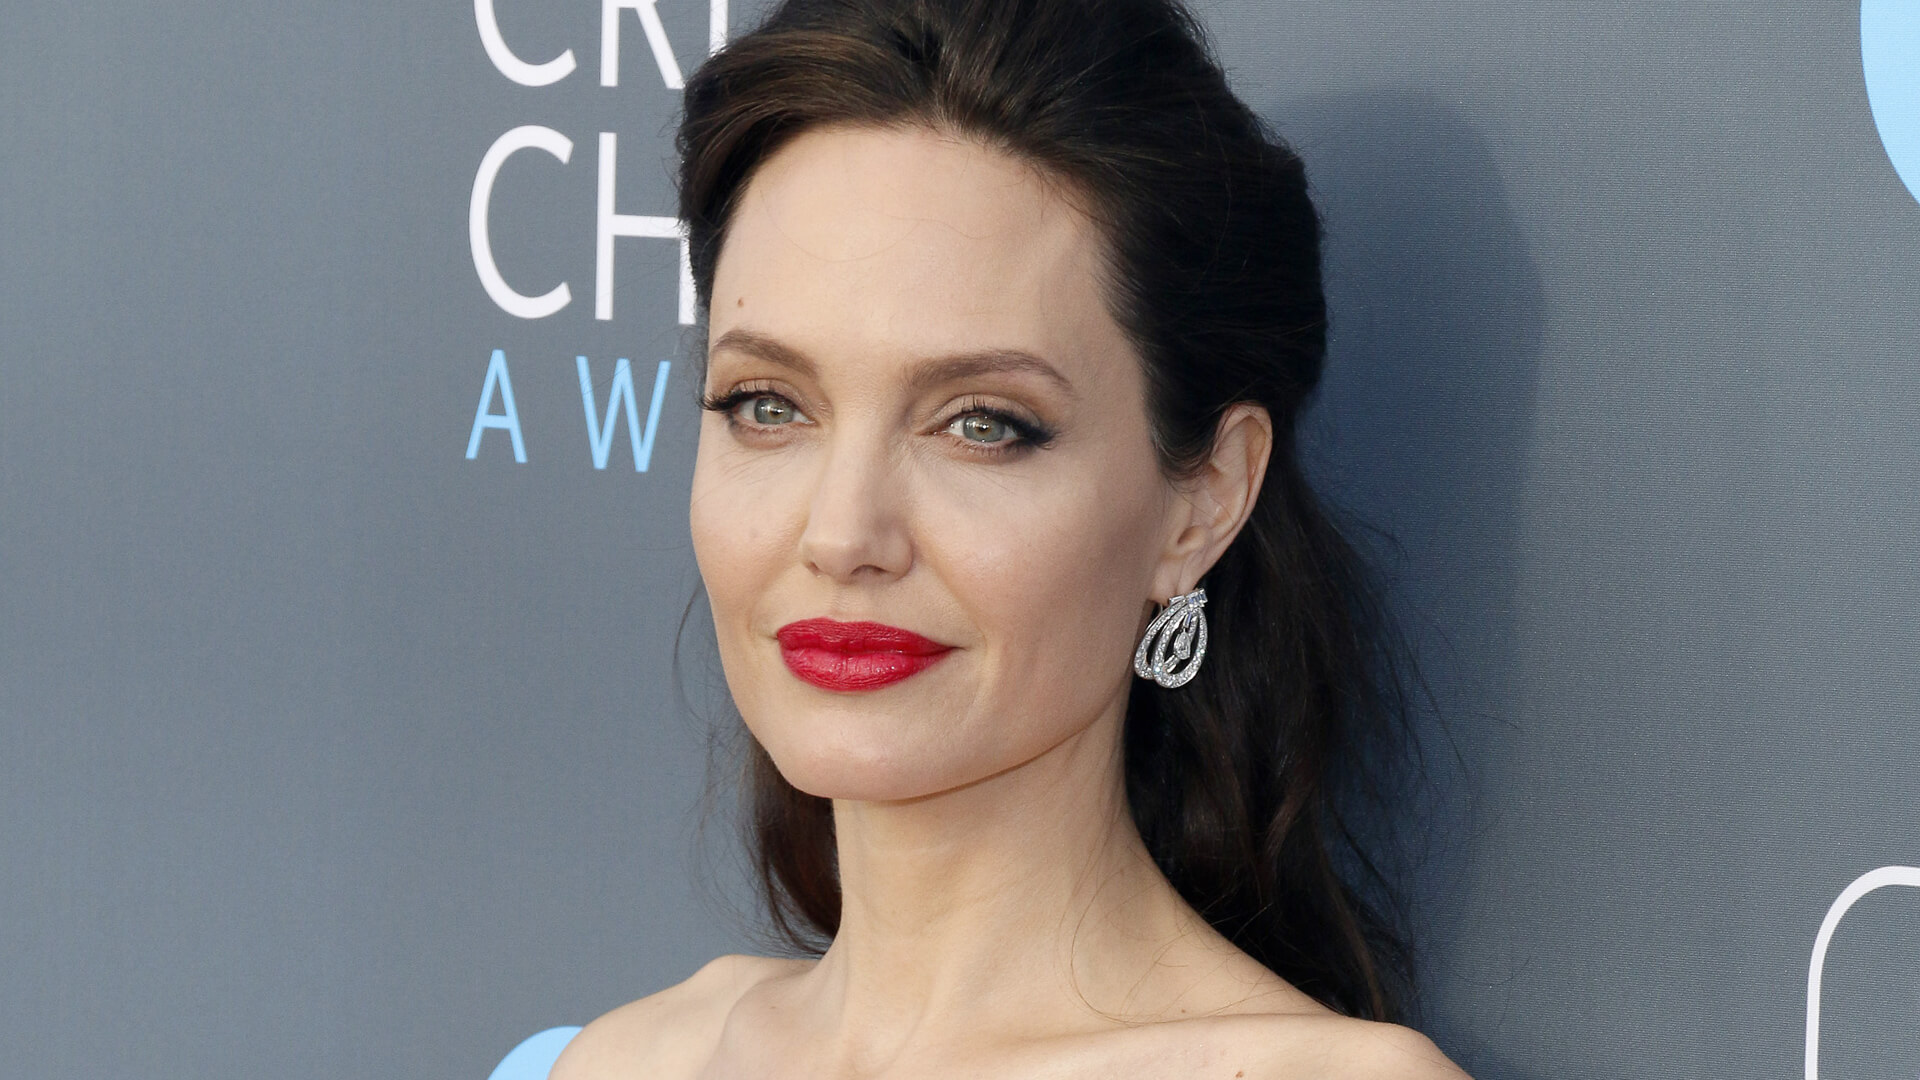 Angelina Jolie Is Launching Atelier Jolie, a New Purpose-Driven